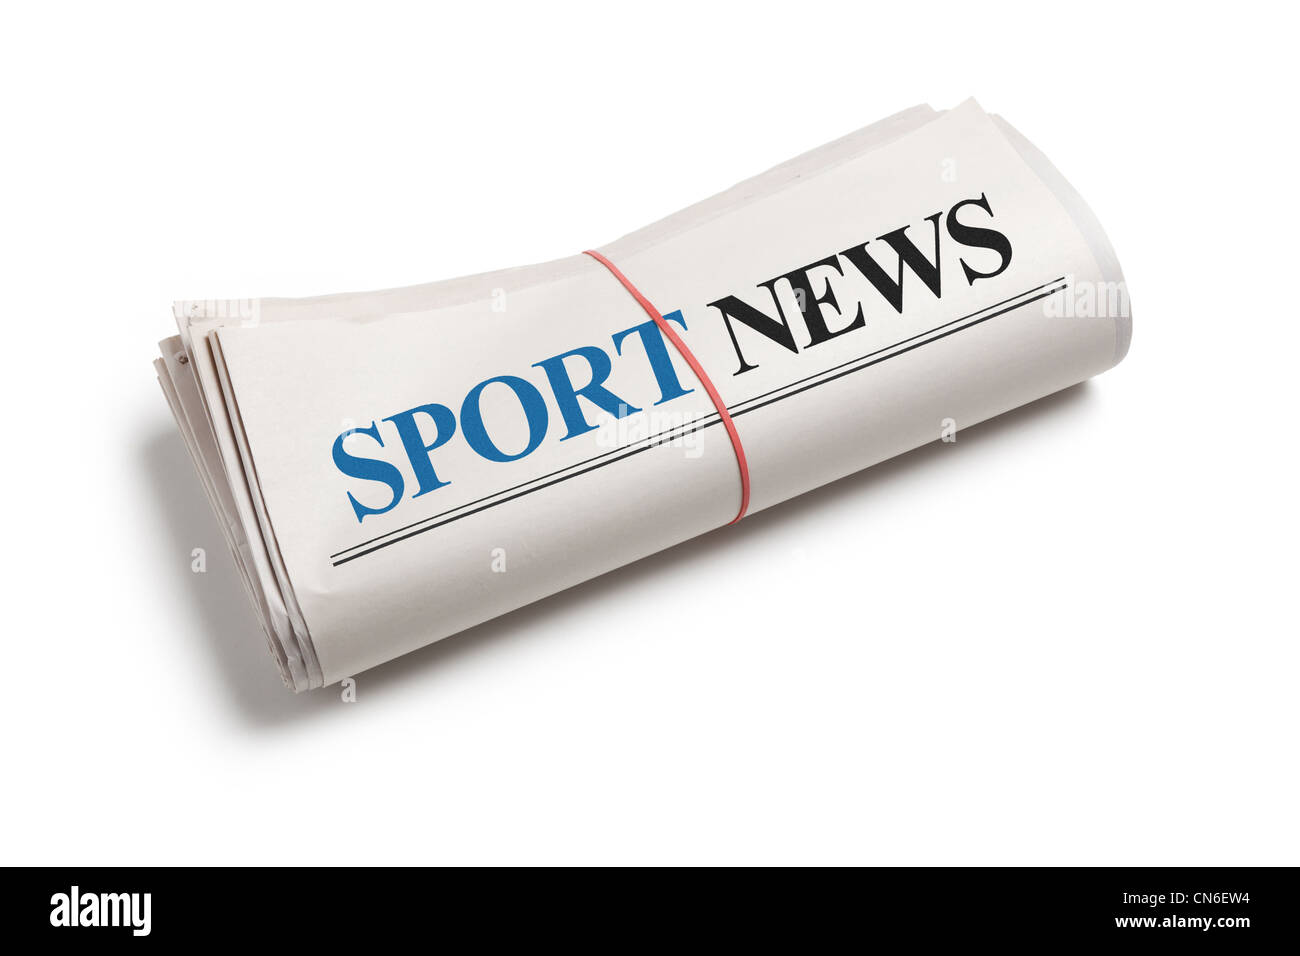 Sport News, Newspaper roll with white background Stock Photo